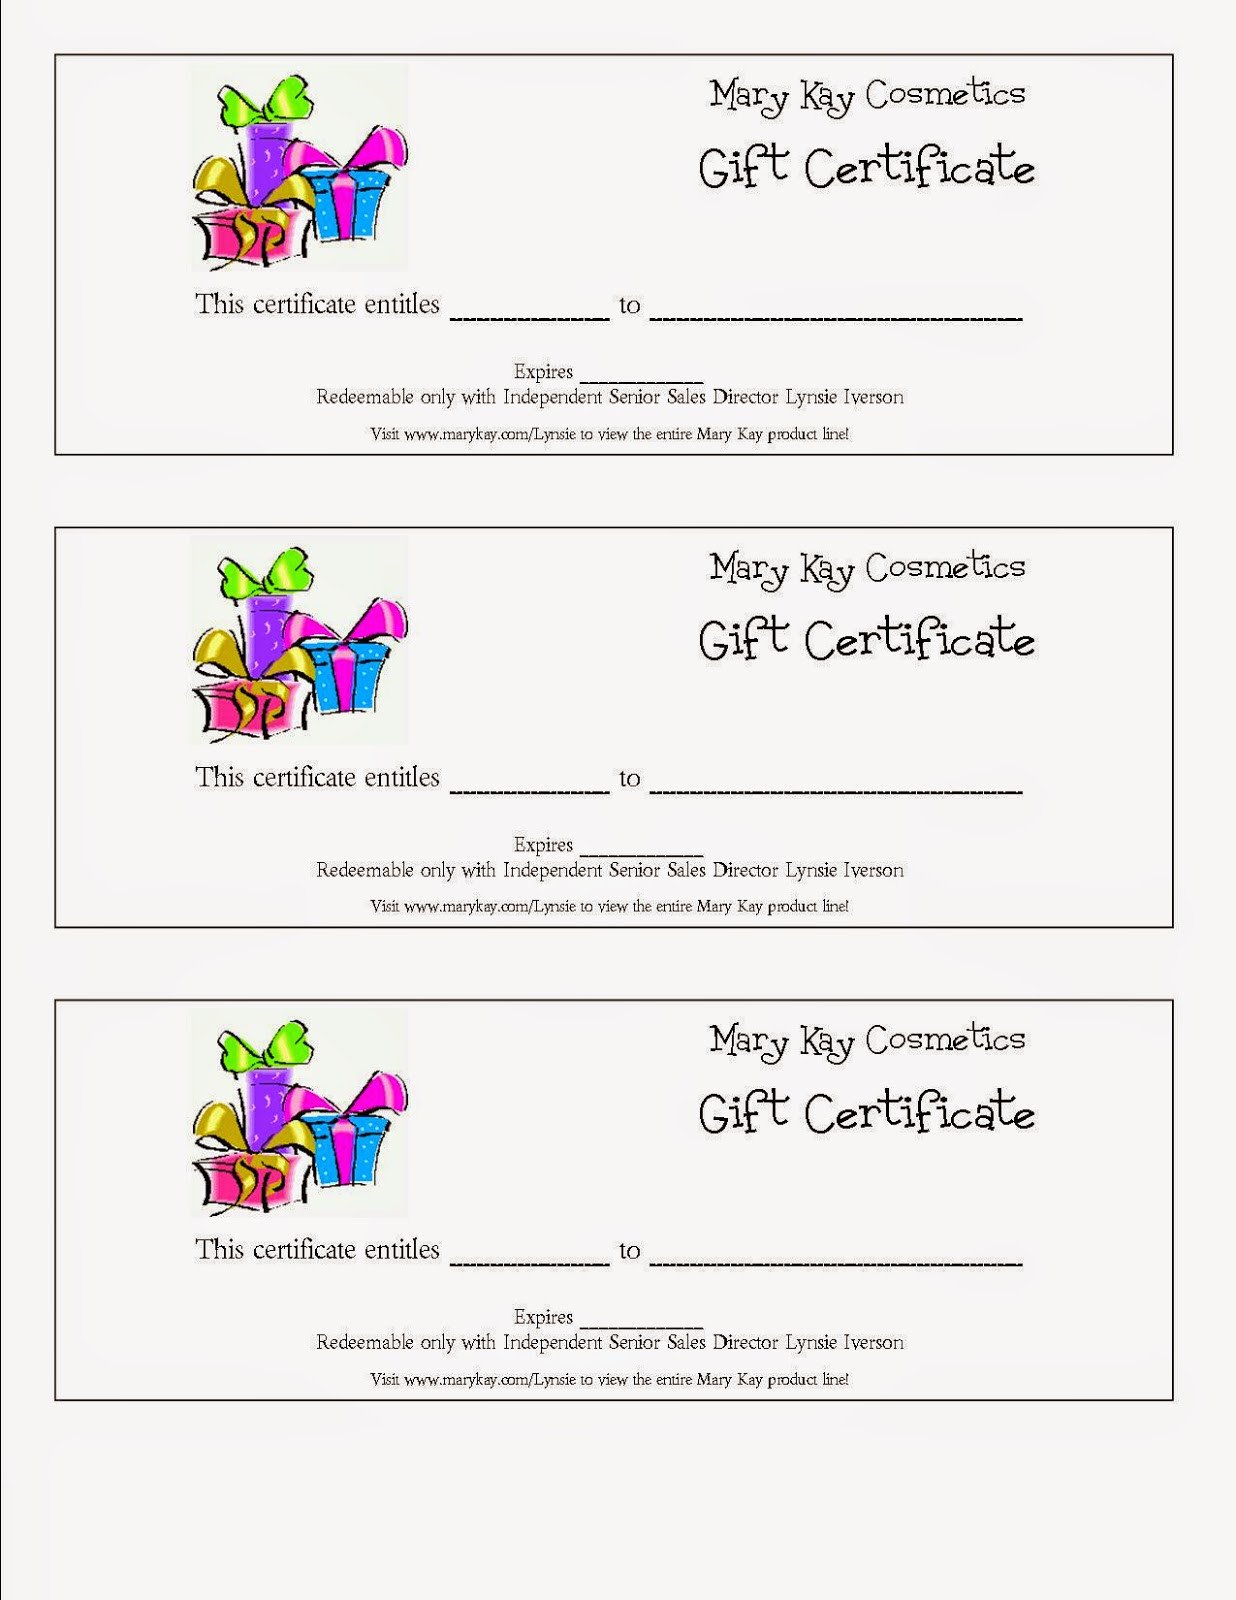 Mary Kay Gift Certificate Pdf